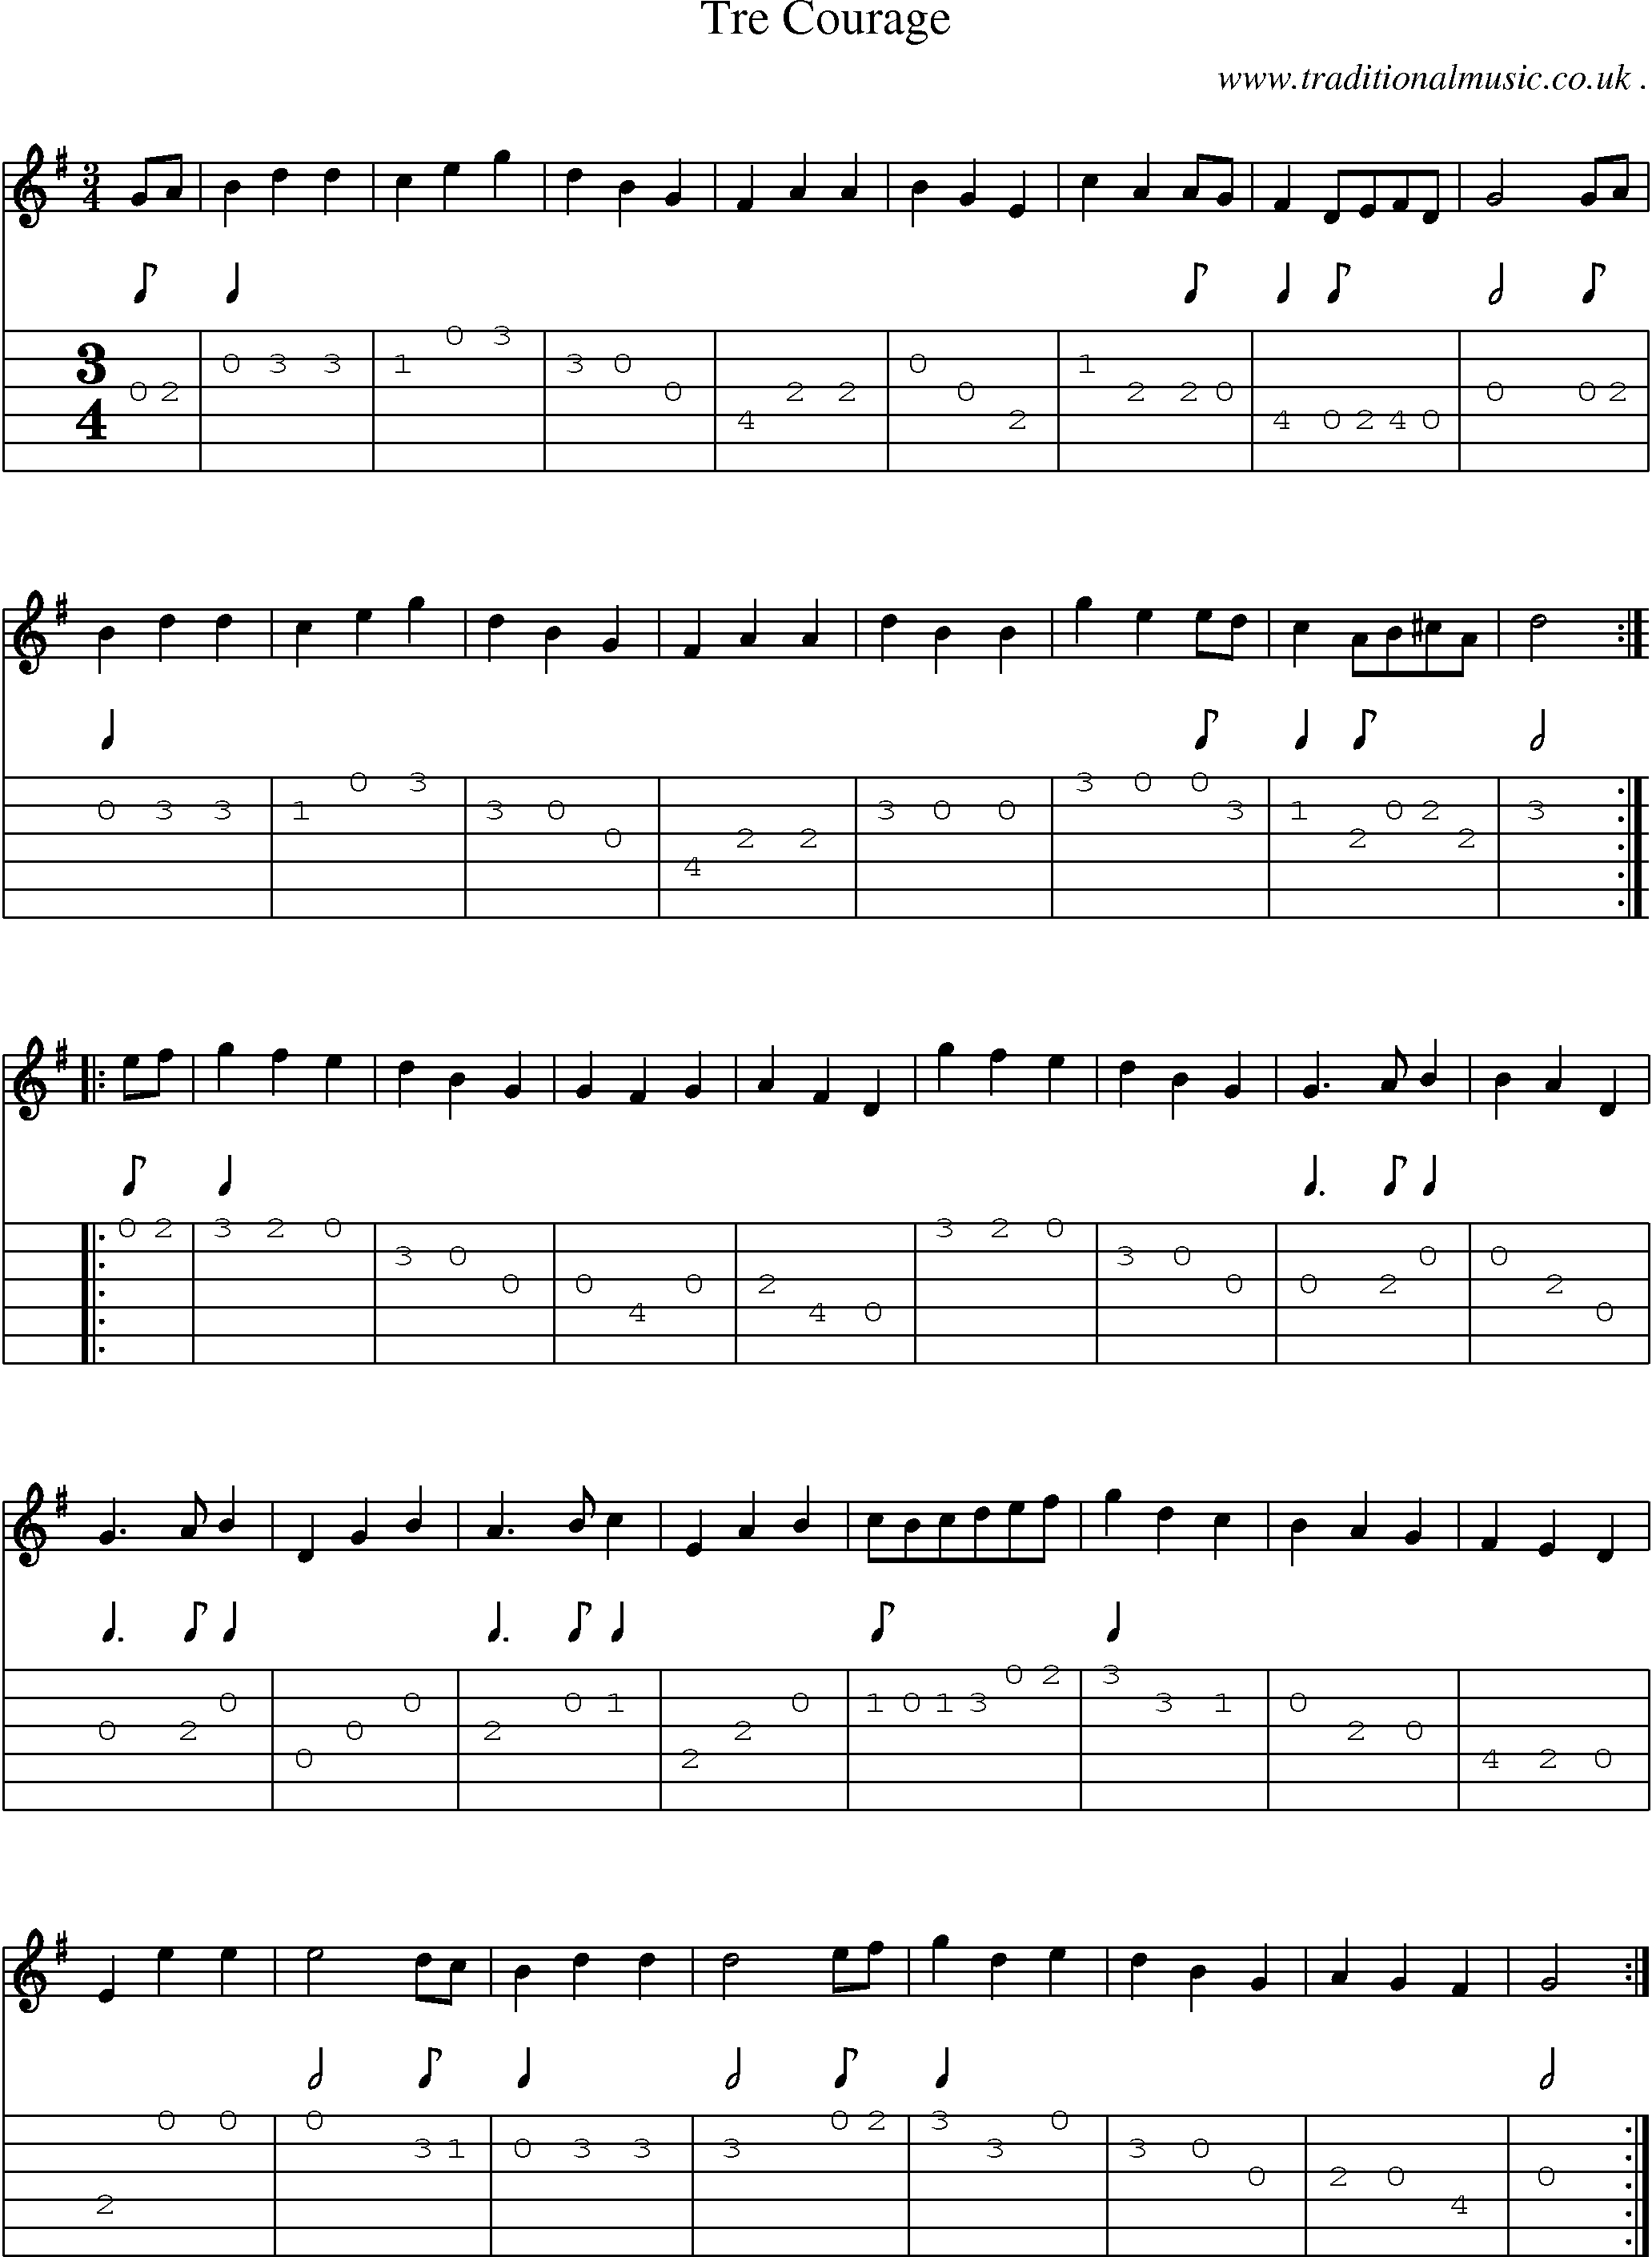 Sheet-Music and Guitar Tabs for Tre Courage